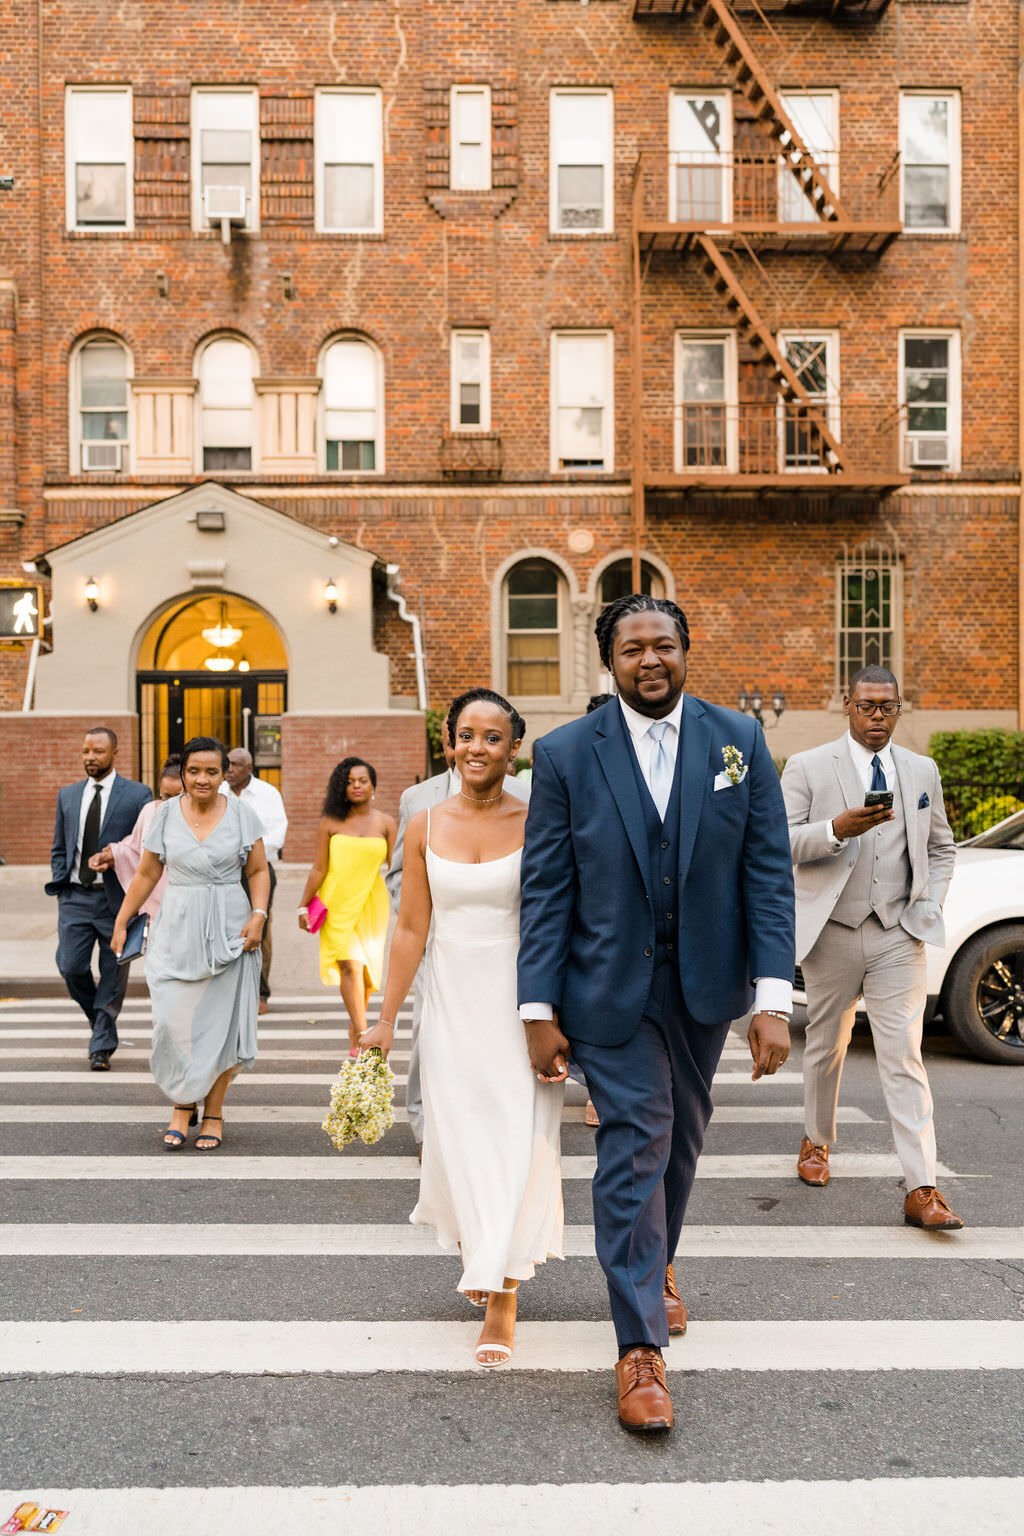 bride and groom walking across a crosswalk with their family following behind